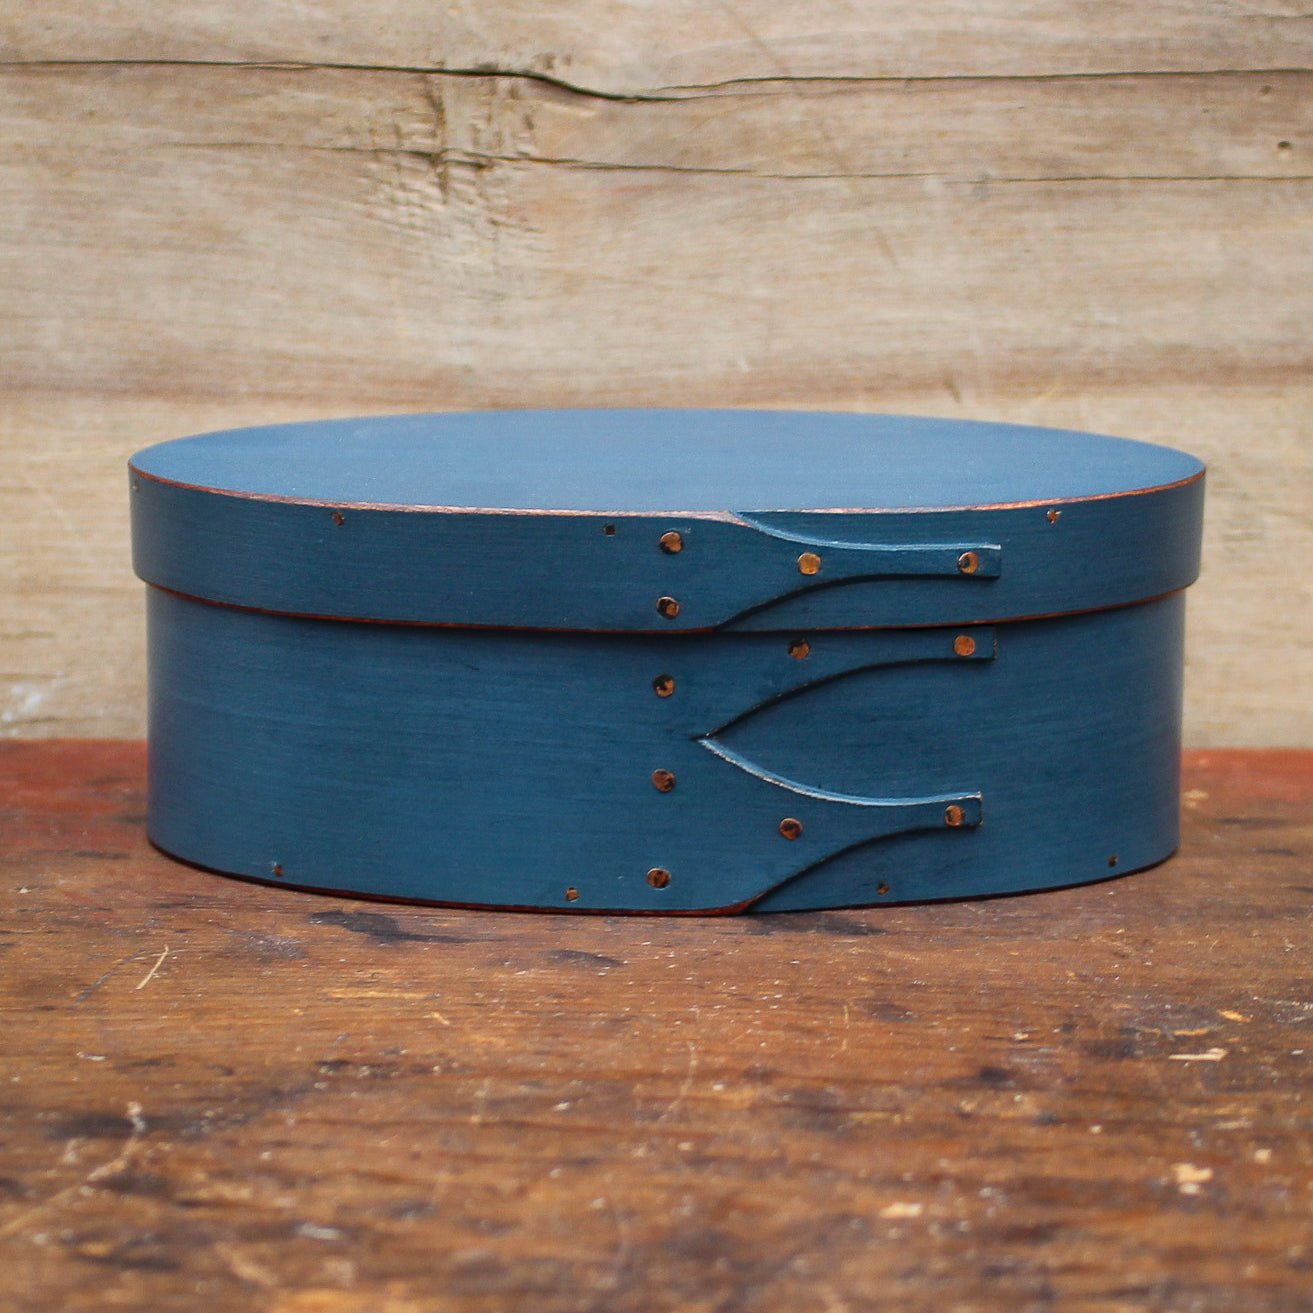 Shaker Oval Box, Size #2, LeHays Shaker Boxes, Handcrafted in Maine. Blue Milk Paint Finish, Front View